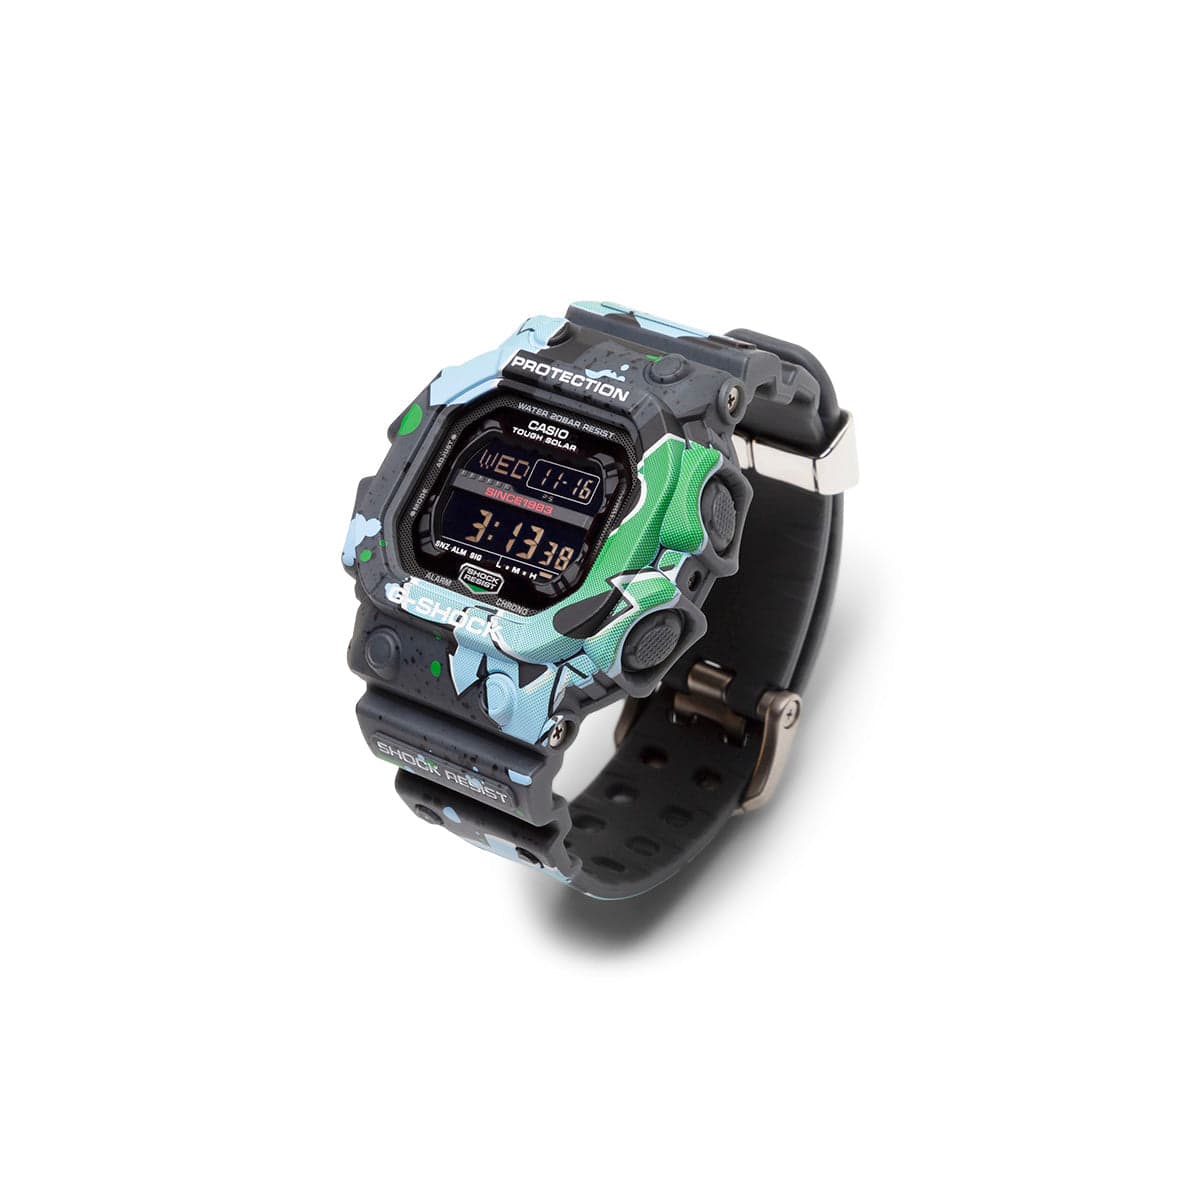 G-Shock Watches MULTI / O/S GX56SS-1